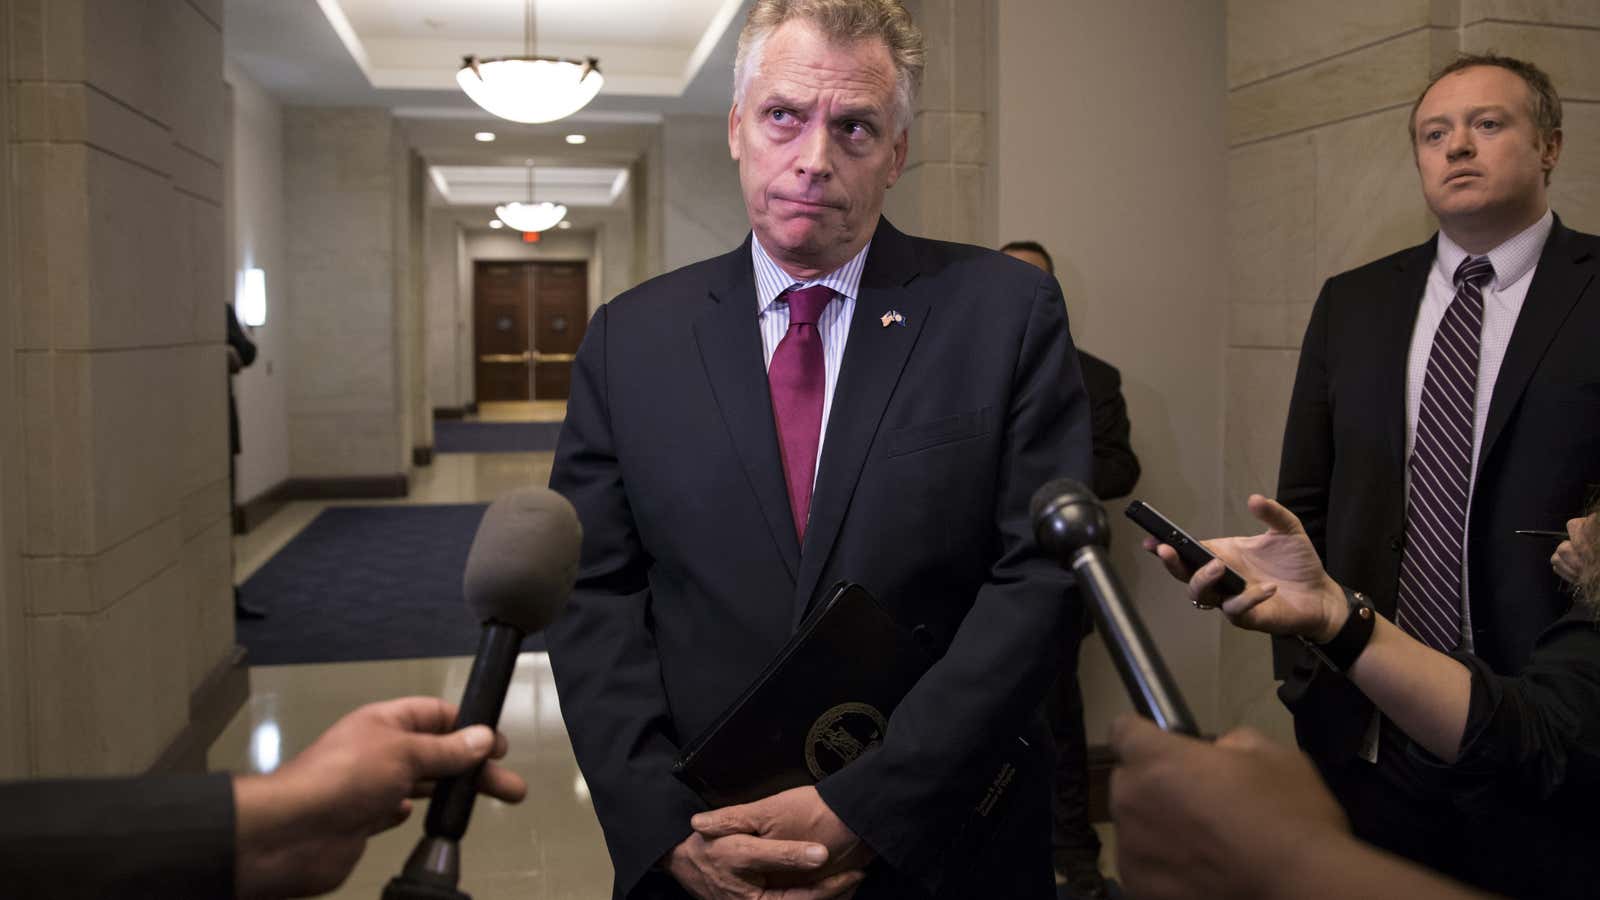 McAuliffe says he is within his rights.